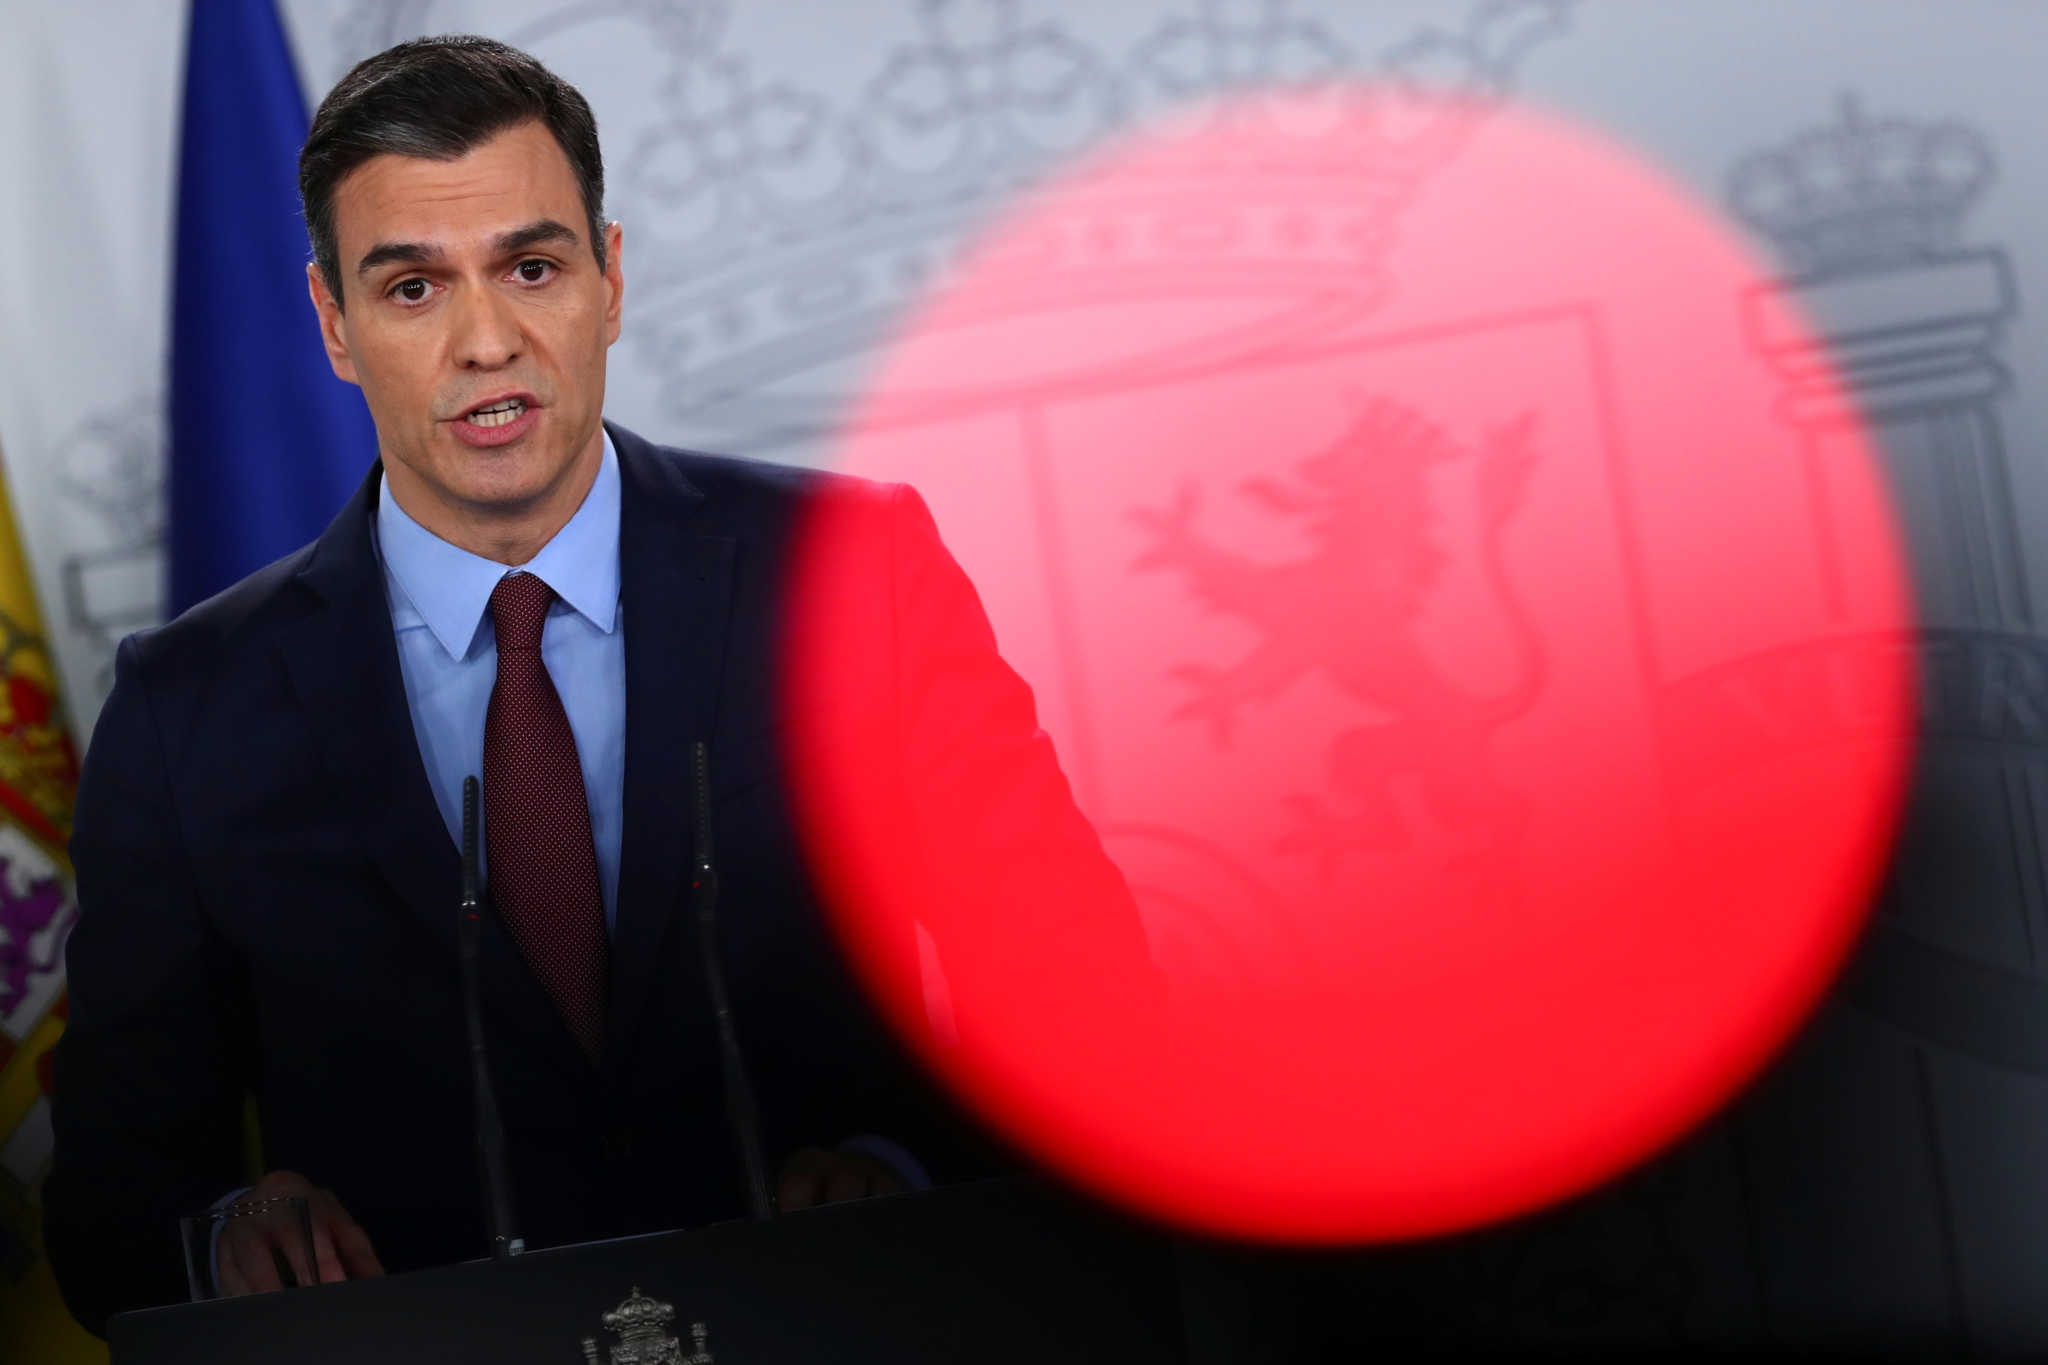 Spanish Prime Minister Pedro Sanchez speaks during a news conference after taking part in a conference call with European leaders at the Moncloa Palace in Madrid, Spain March 10, 2020. REUTERS/Sergio Perez